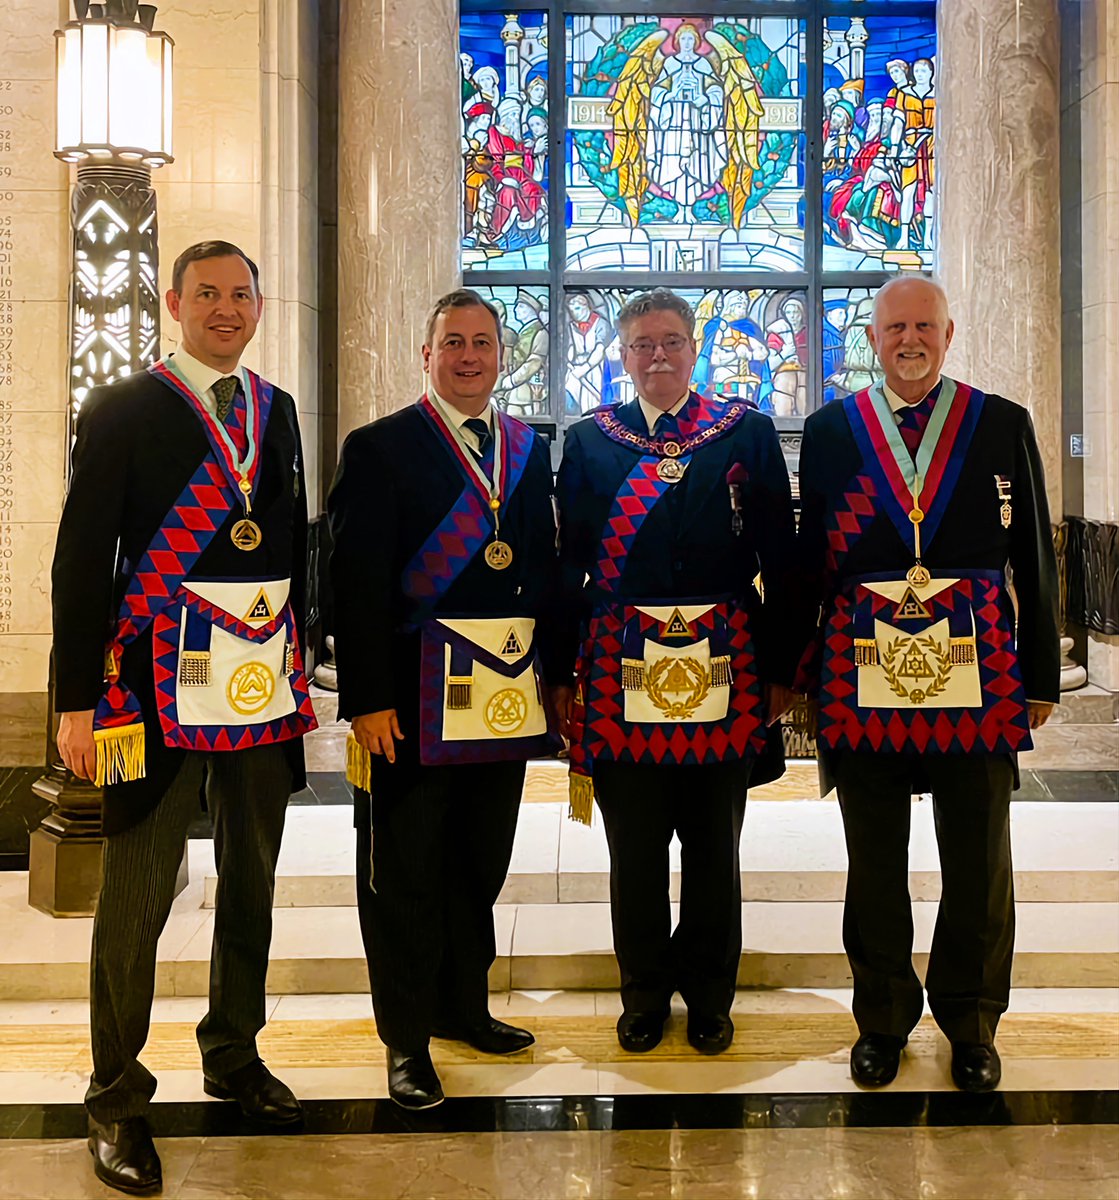 Distinguished members of Dorset Freemasonry Royal Arch attended London today to congratulate those @SurreyMason receiving appointments and promotions at the @UGLE_GrandLodge #Freemasons #RoyalArch